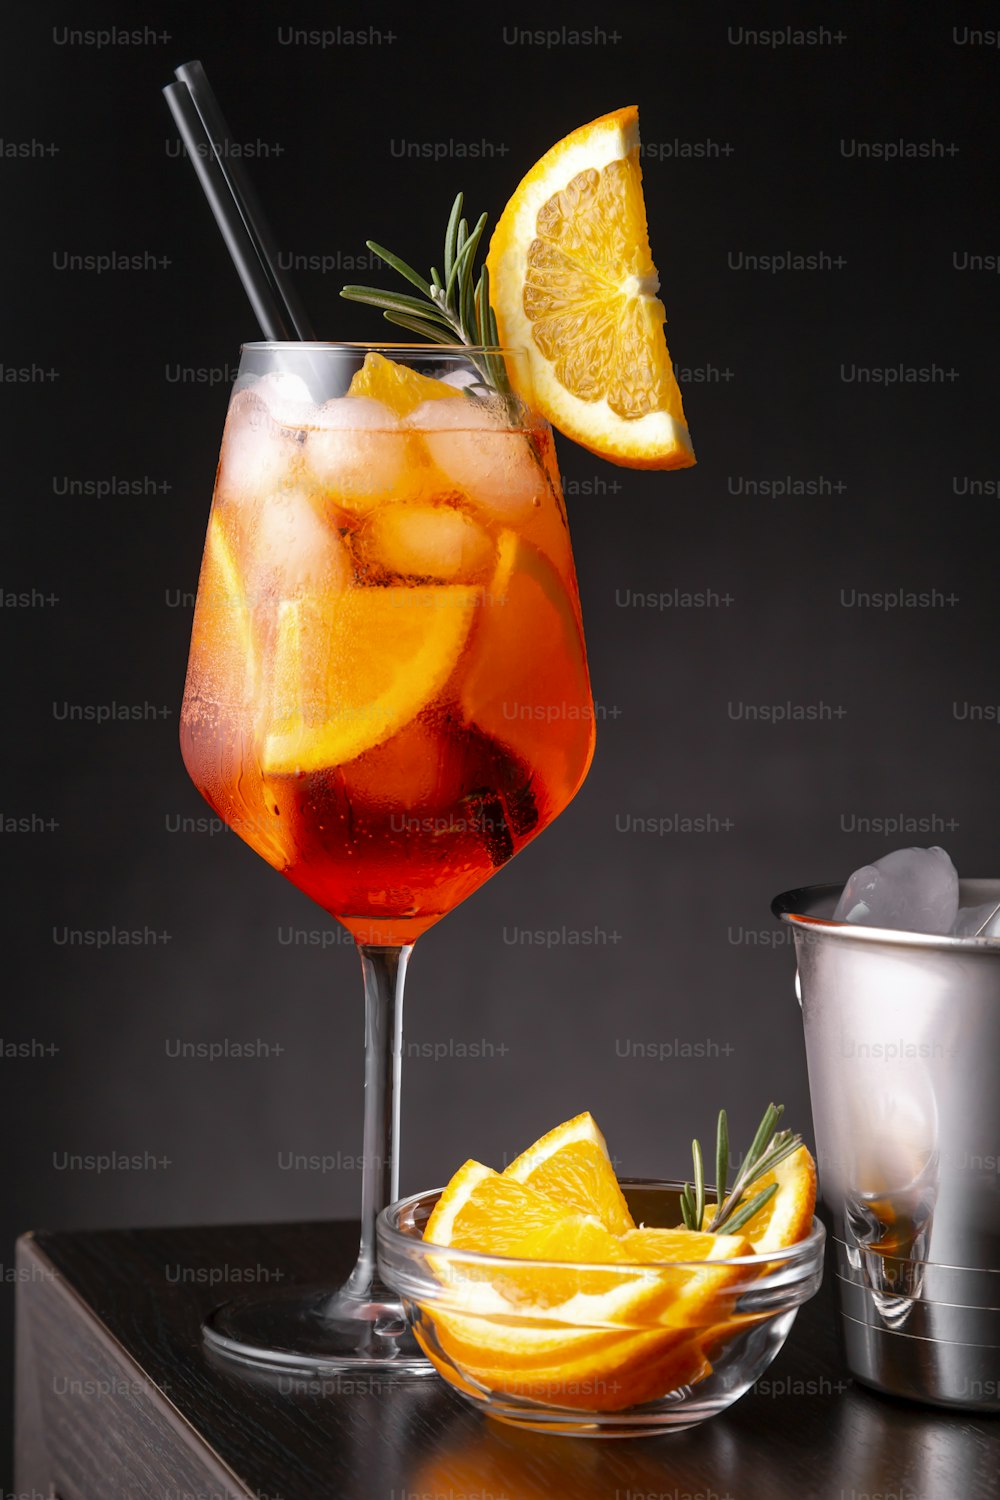 Spritz cocktail served in a wineglass with lots of ice, decorated with slice of orange and rosemary branch, placed on a bar counter